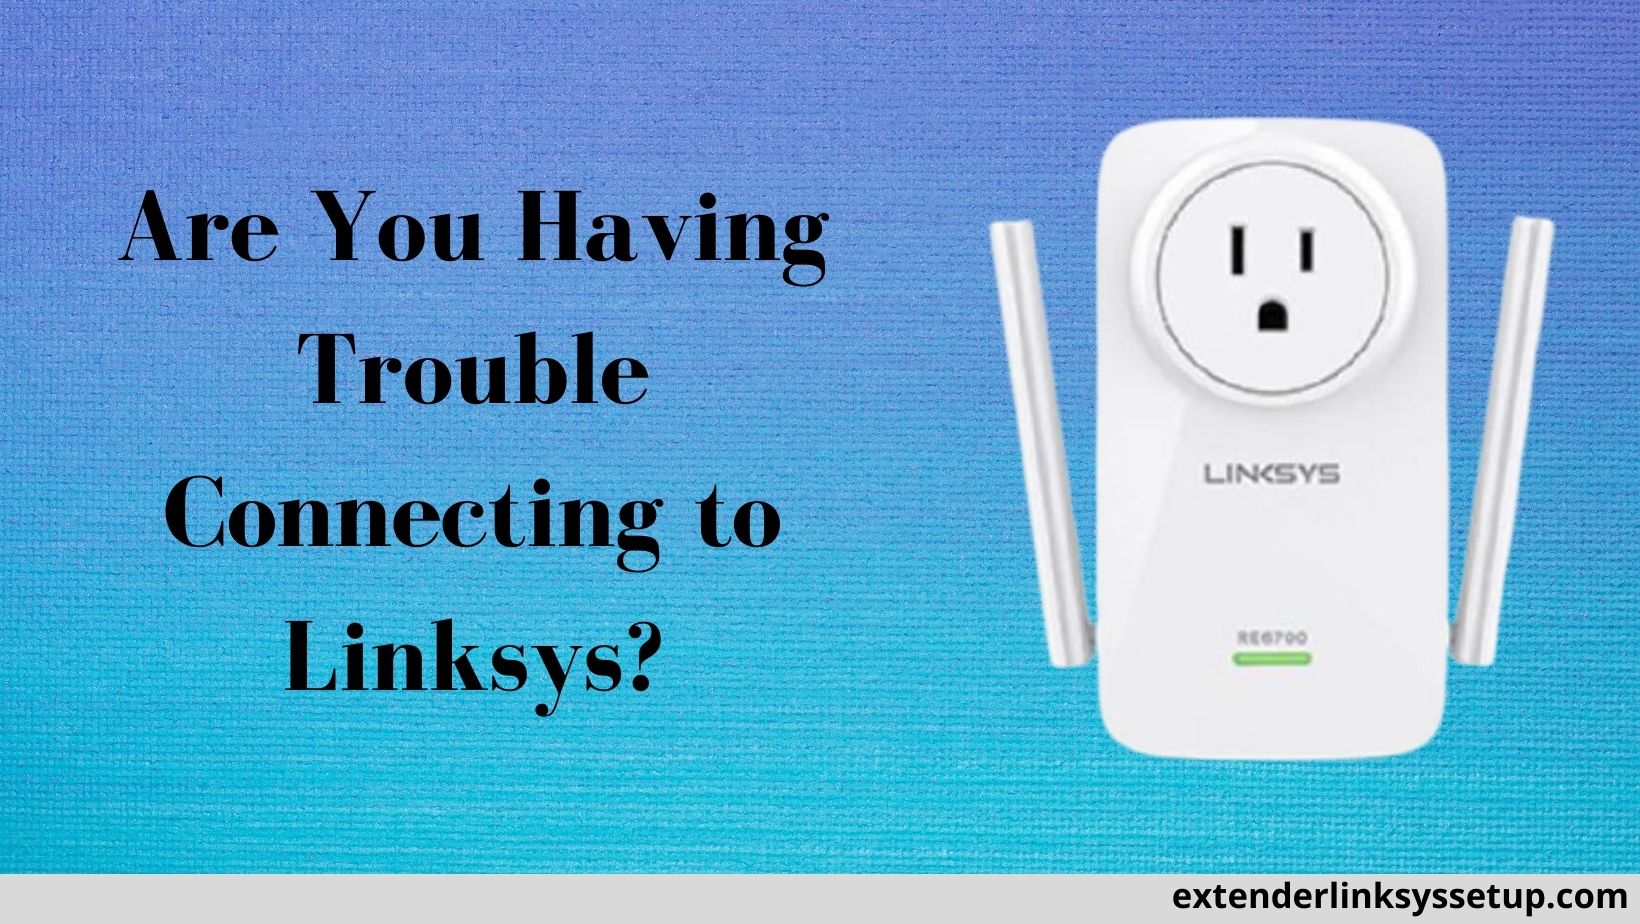 Trouble Connecting to Linksys